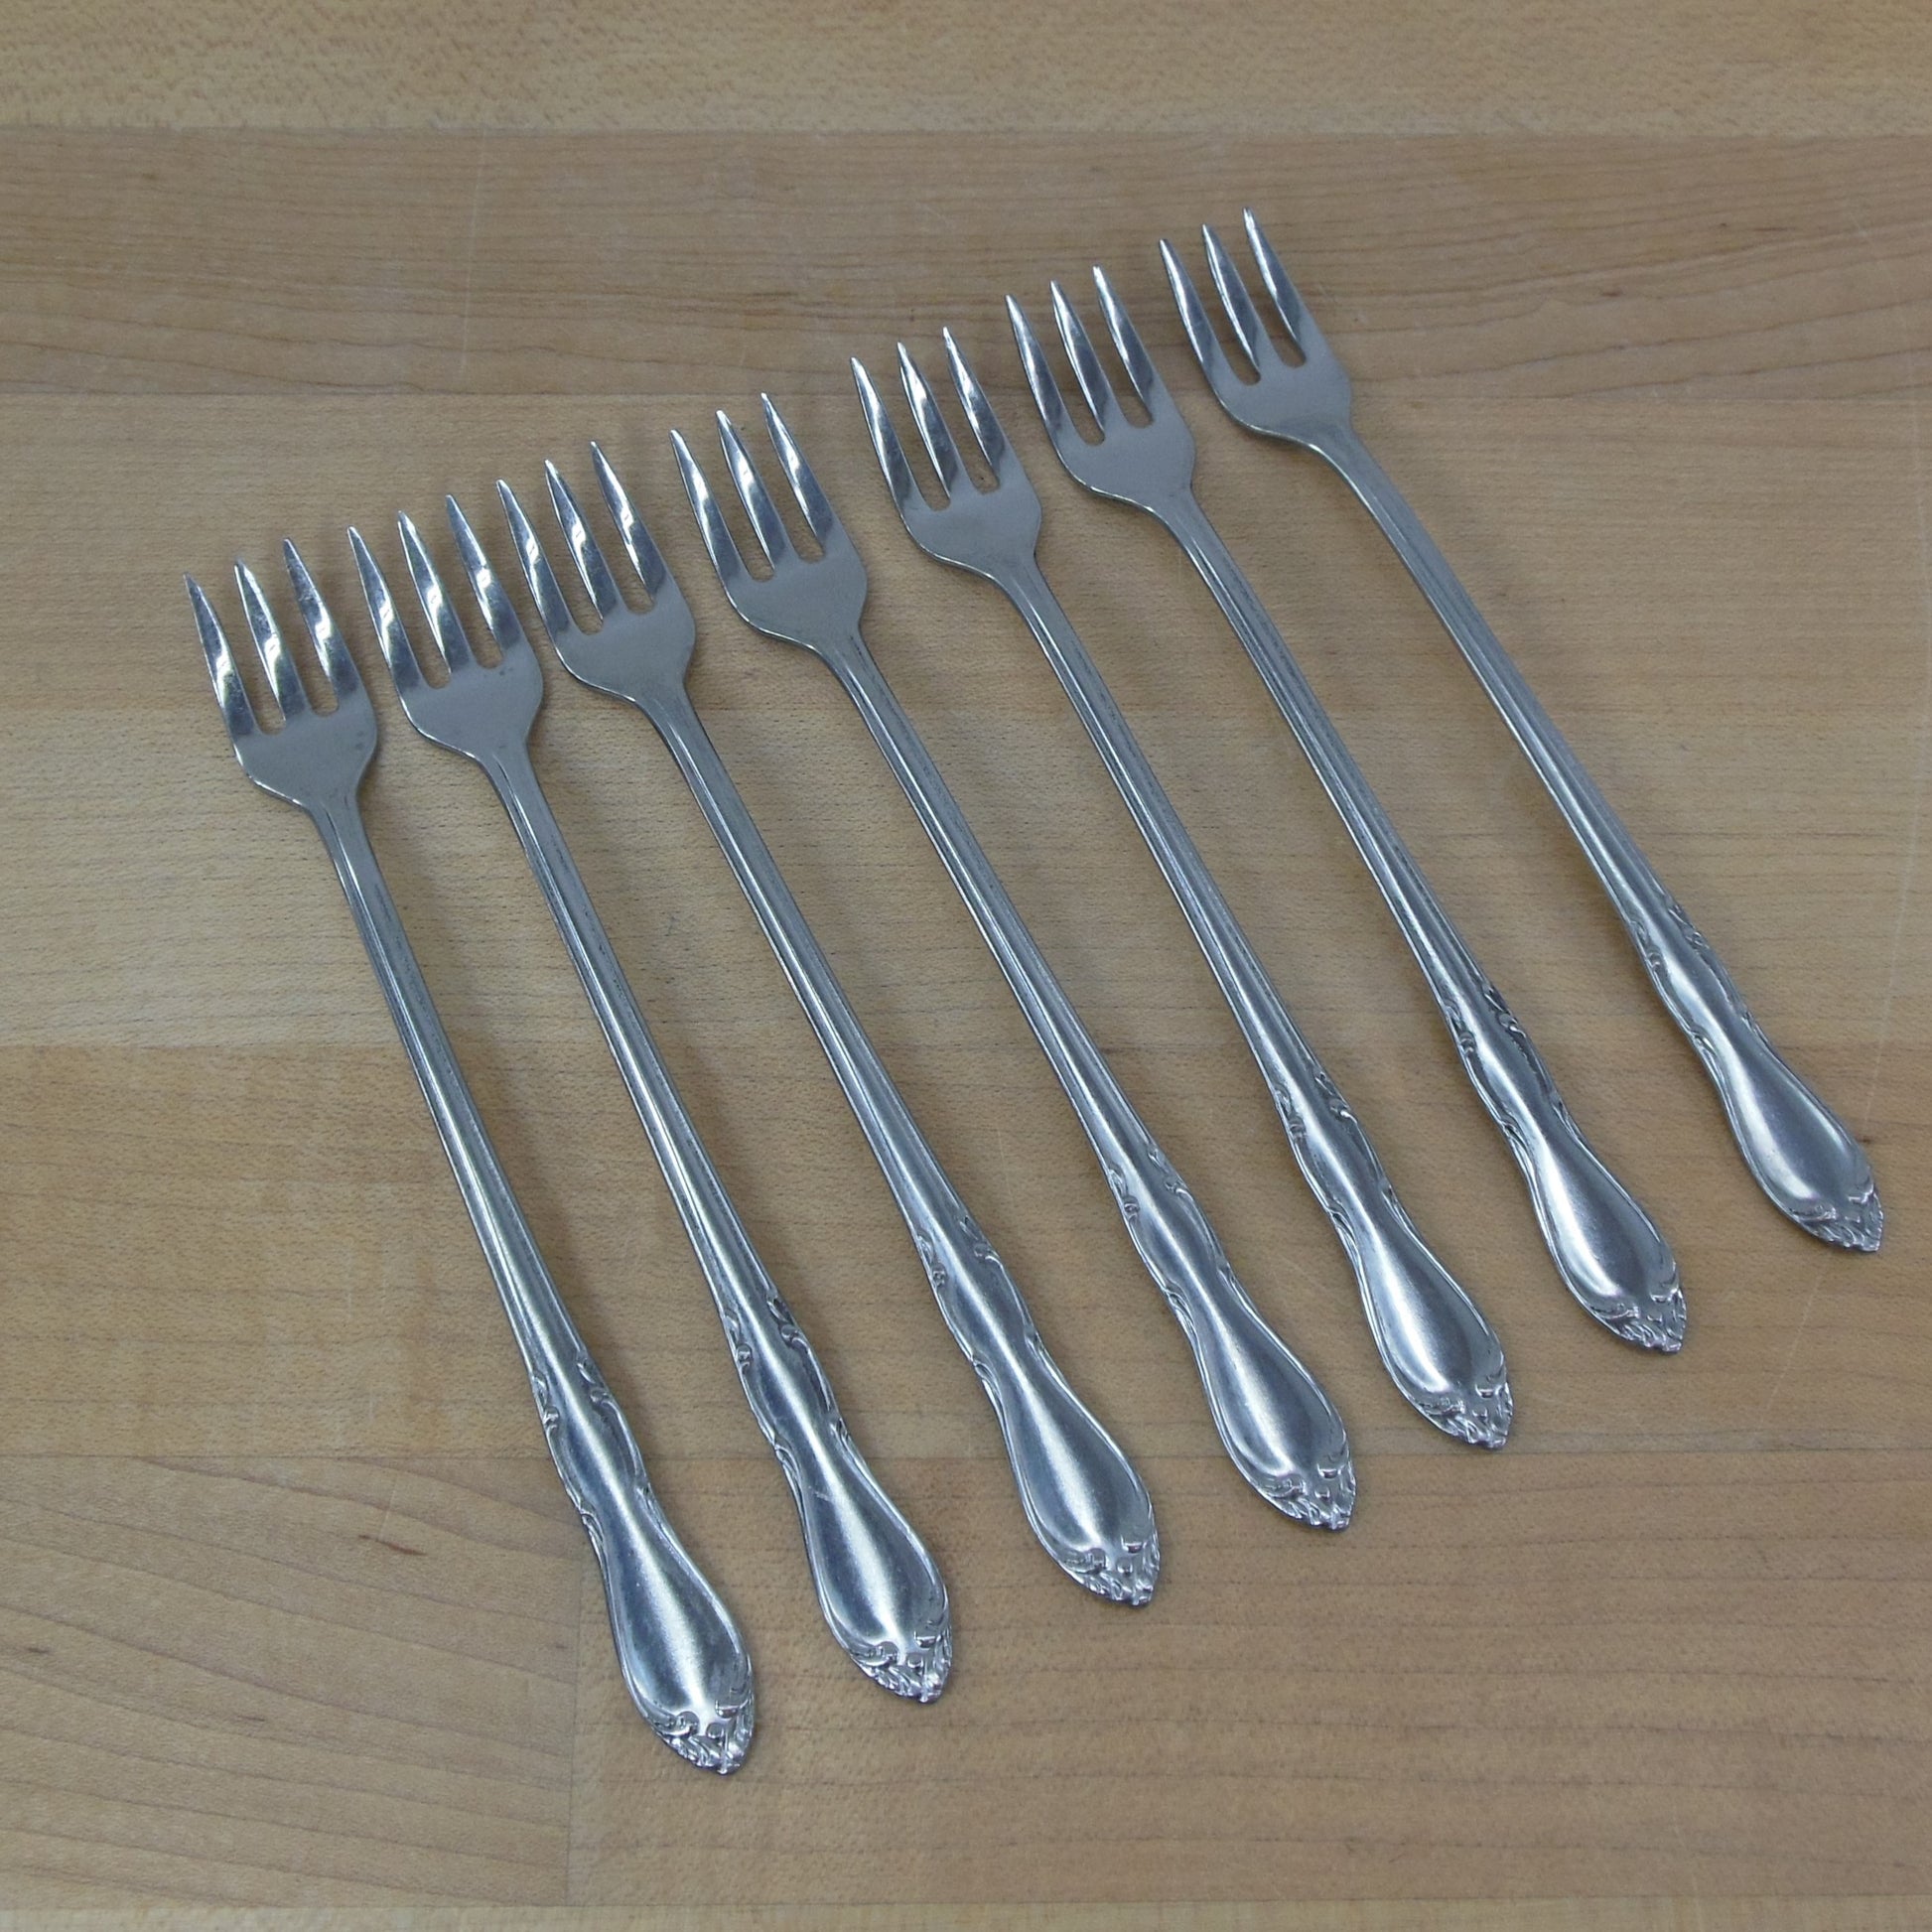 Oneida Simon L. & George H Rogers Co. Homestead Stainless Cocktail Seafood Forks Vintage